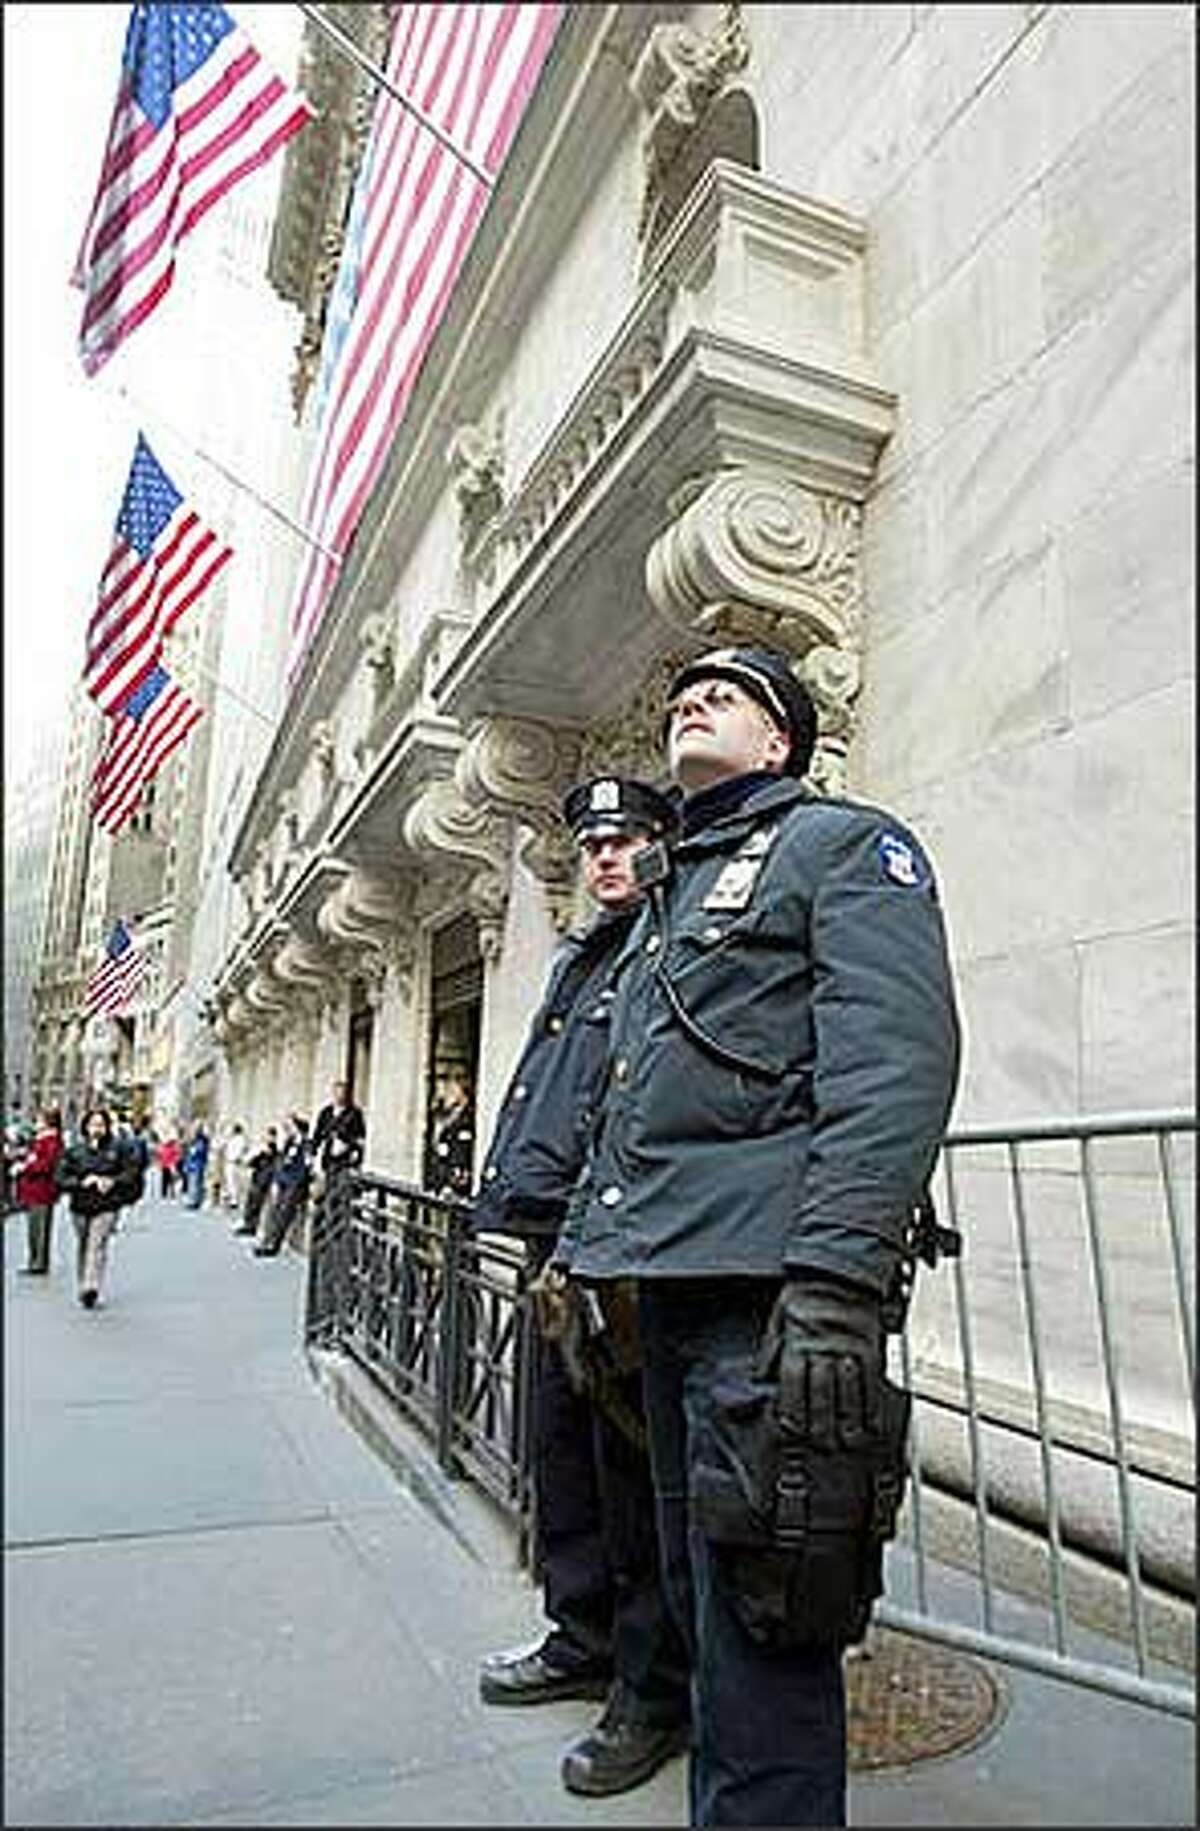 Police patrol outside The New York Stock Exchange Wednesday, Feb. 12, 2003. Police stepped up security at airports, subways and hotels and other public places after the nation was put on heightened terrorist alert and law enforcement officials indicated New York was a possible target. (AP Photo/David Karp)